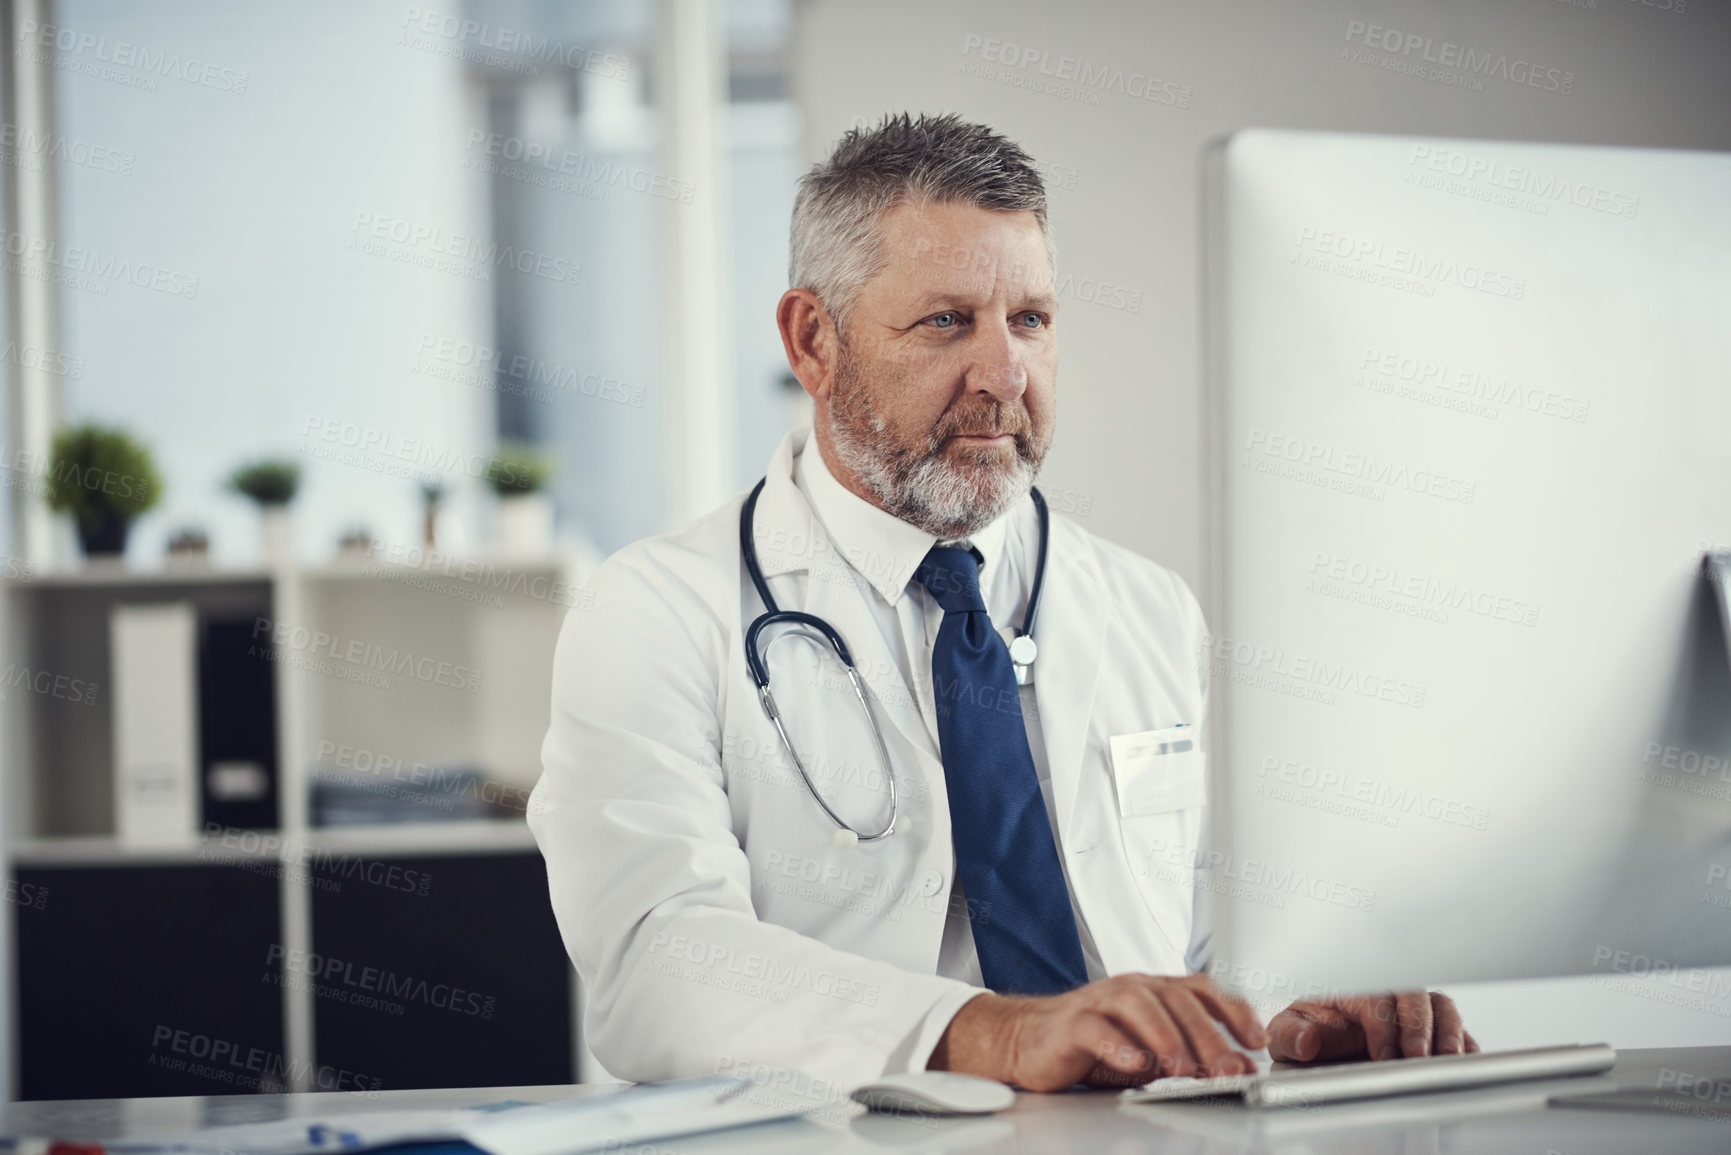 Buy stock photo Shot of a mature doctor using a computer at a desk in his office